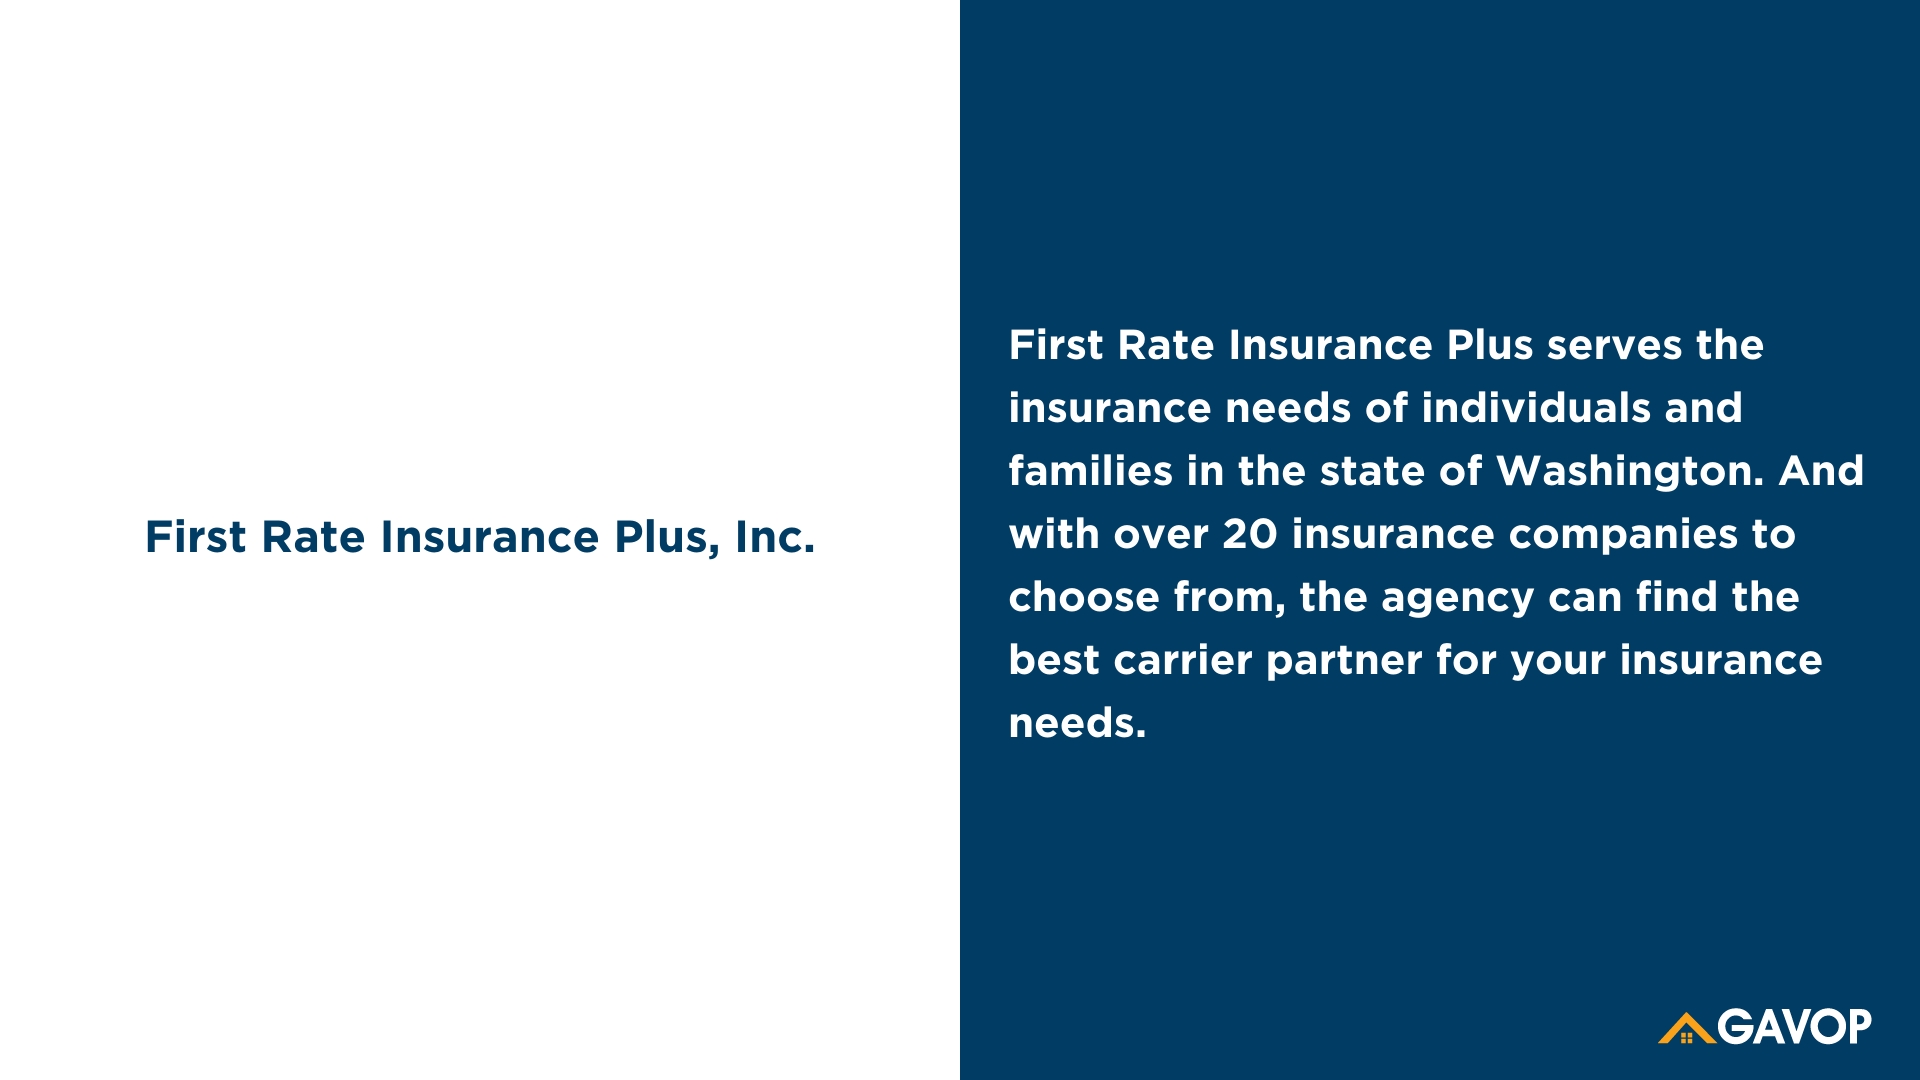 First Rate Insurance Plus, Inc.